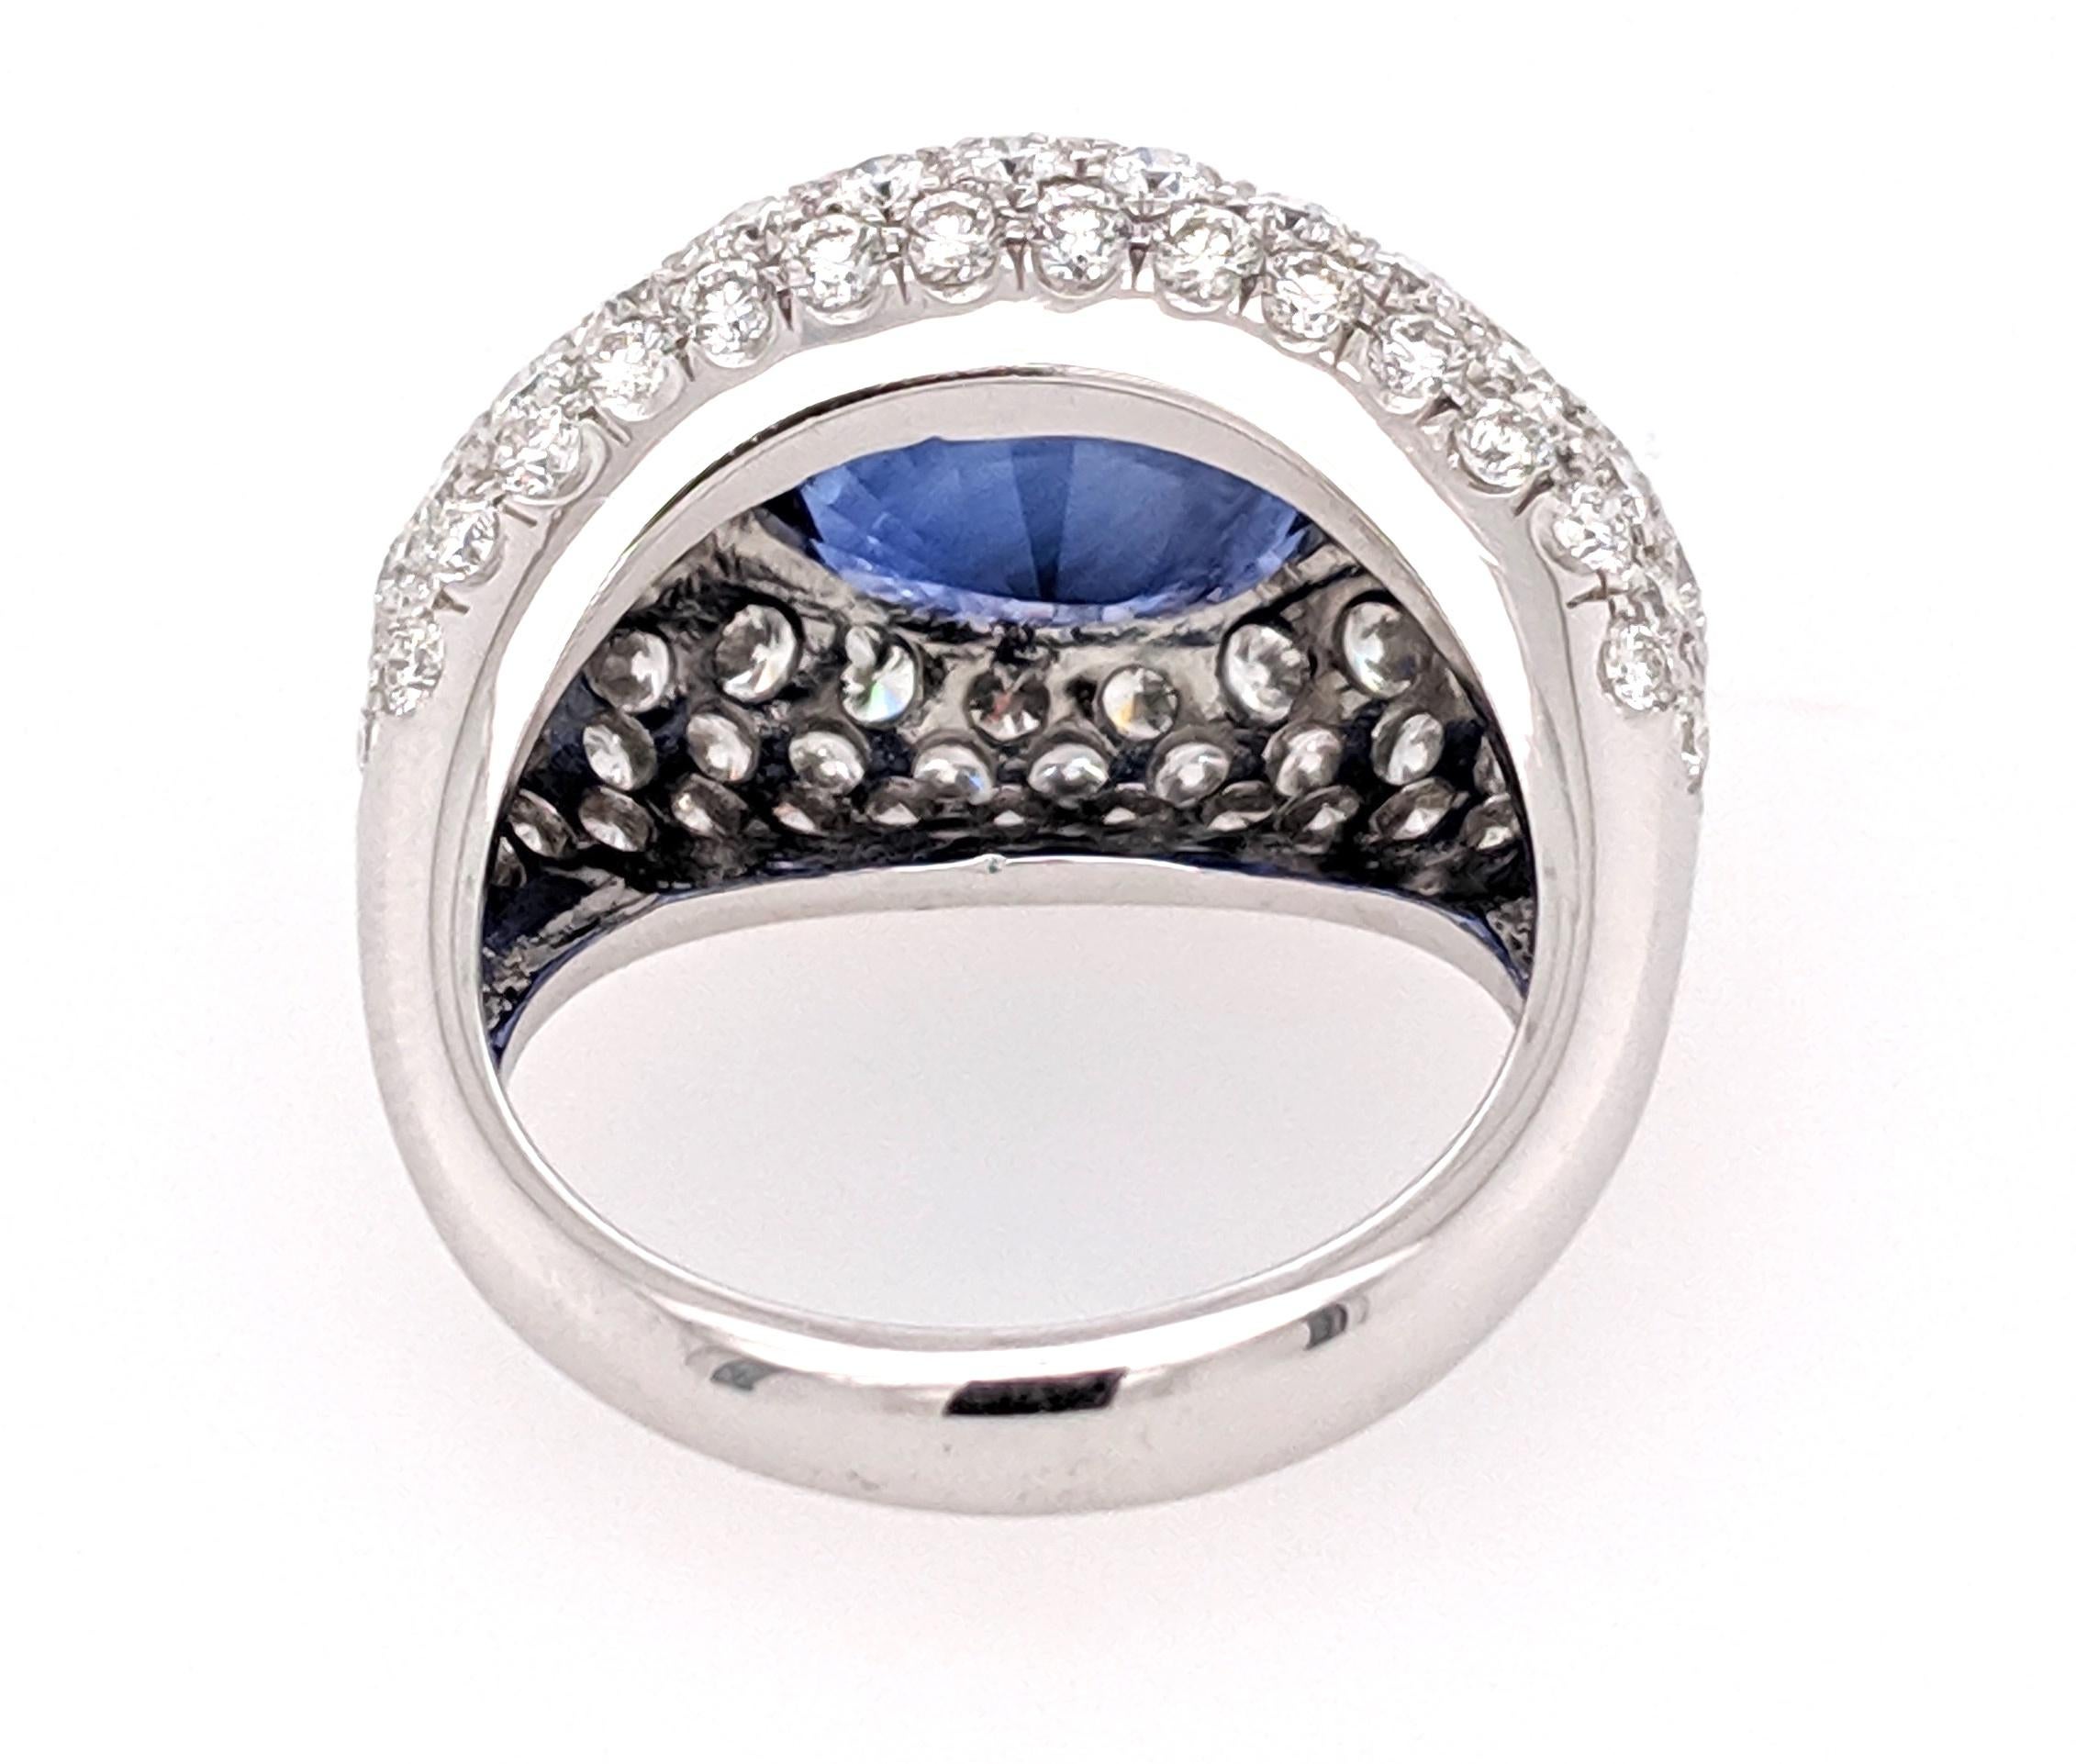 Oval Cut GIA Certified 8.23 Carat Sapphire Diamond Domed Cocktail Ring For Sale